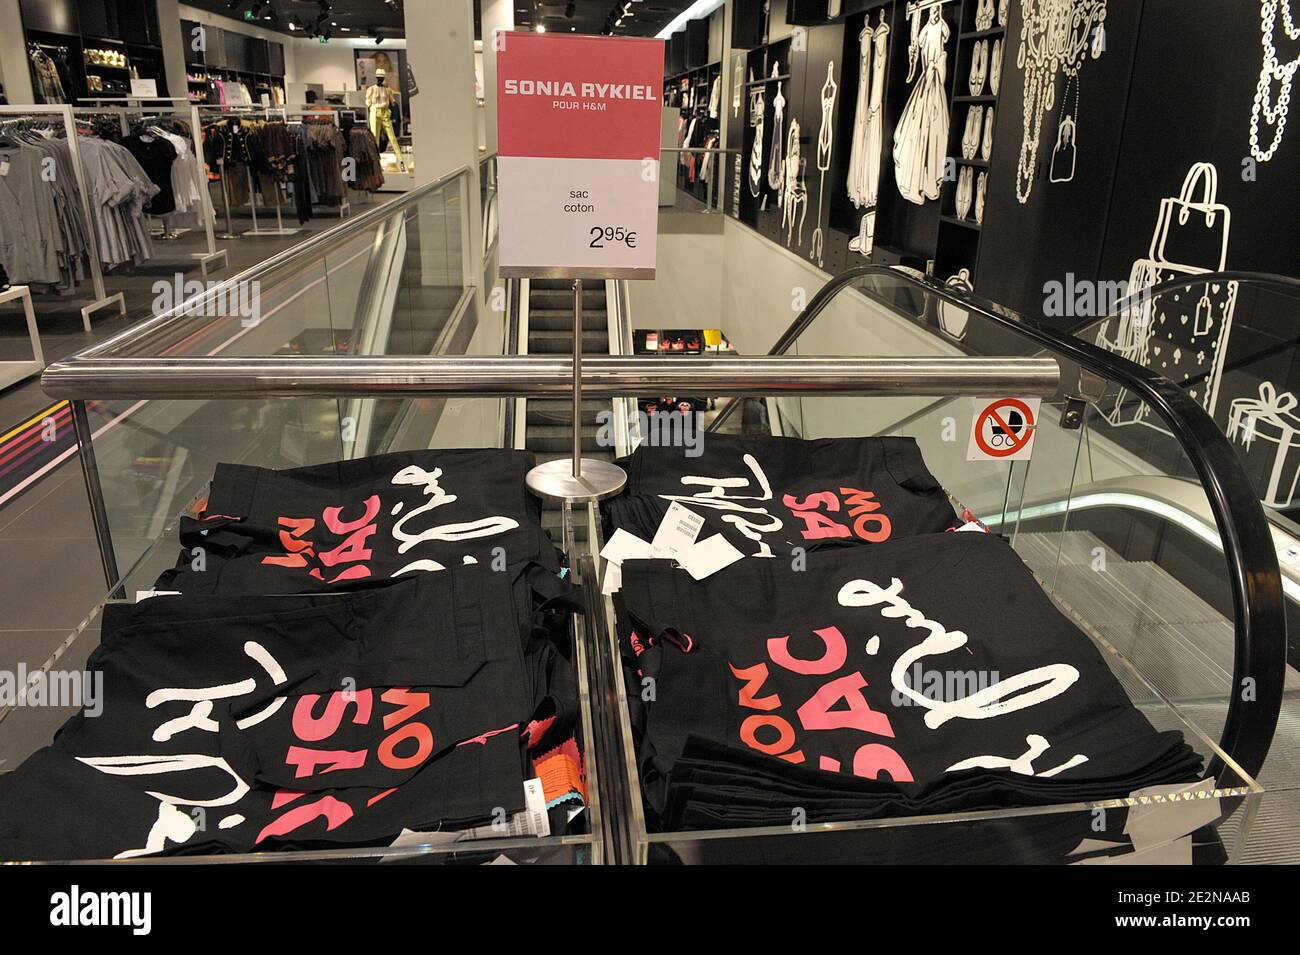 People rush to get clothes in a H&M store stocking the new collection  designed by French designer Sonia Rykiel for H&M. Rykiel's line for H&M,  launched today in several stores, starts at